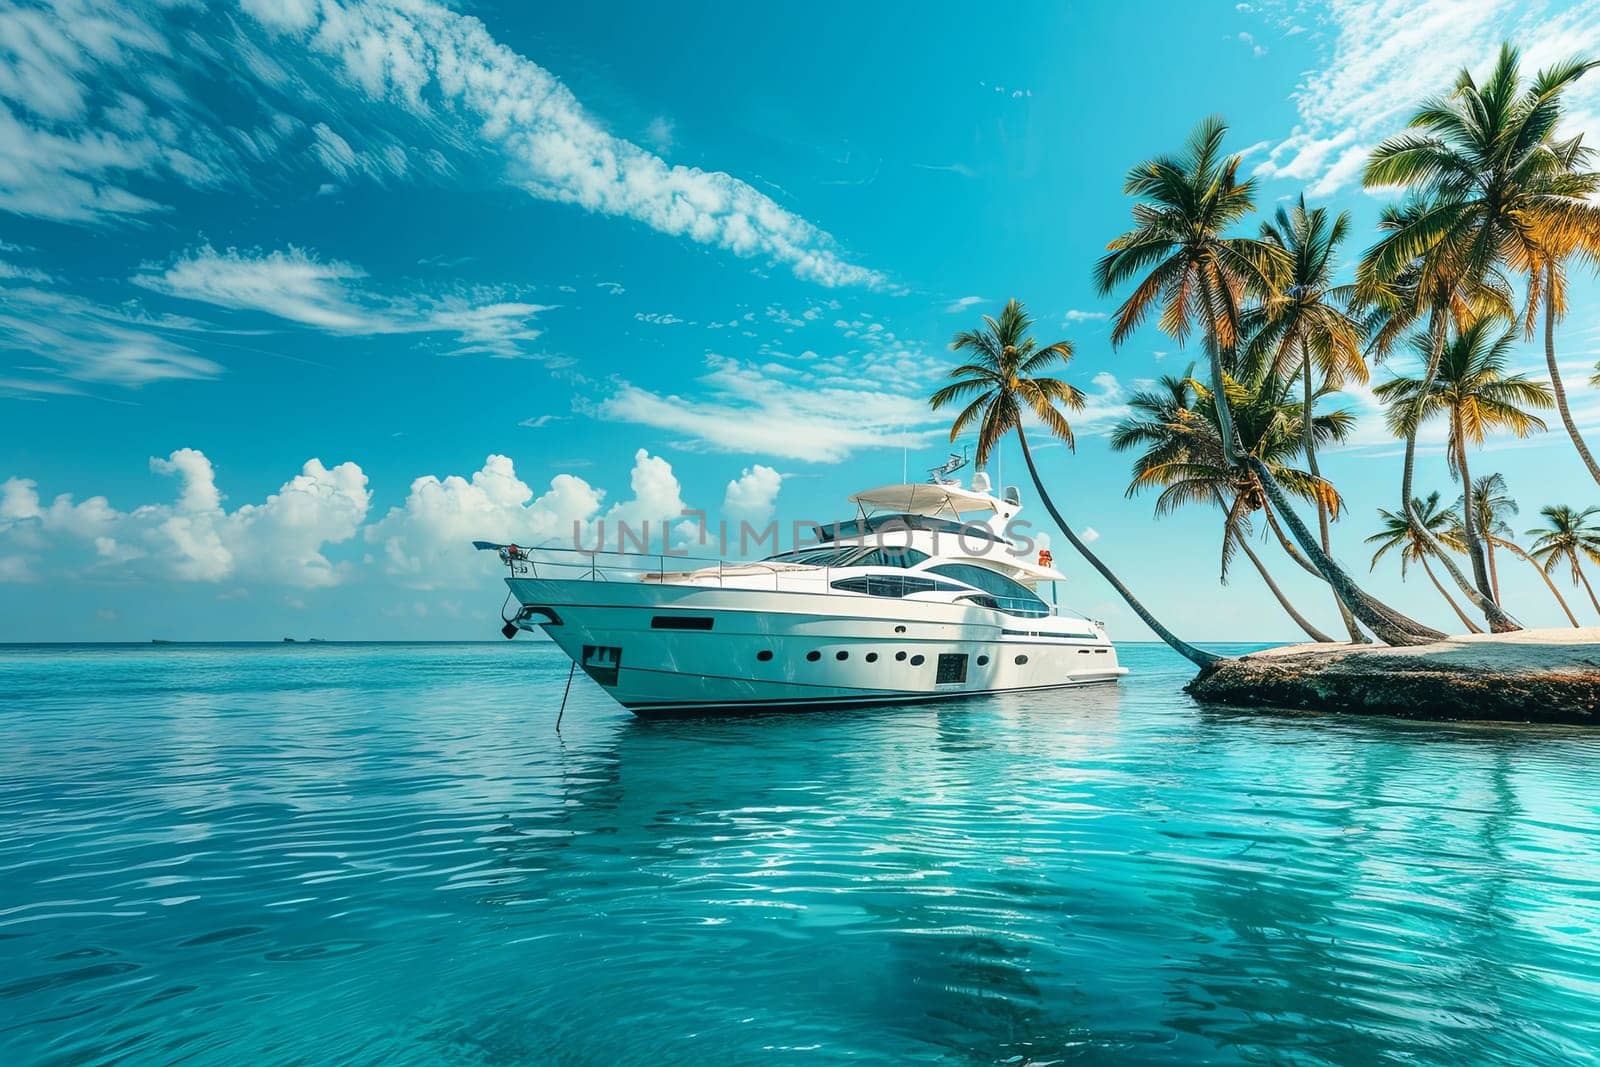 A luxurious yacht peacefully glides through a serene lagoon, surrounded by swaying palm trees.